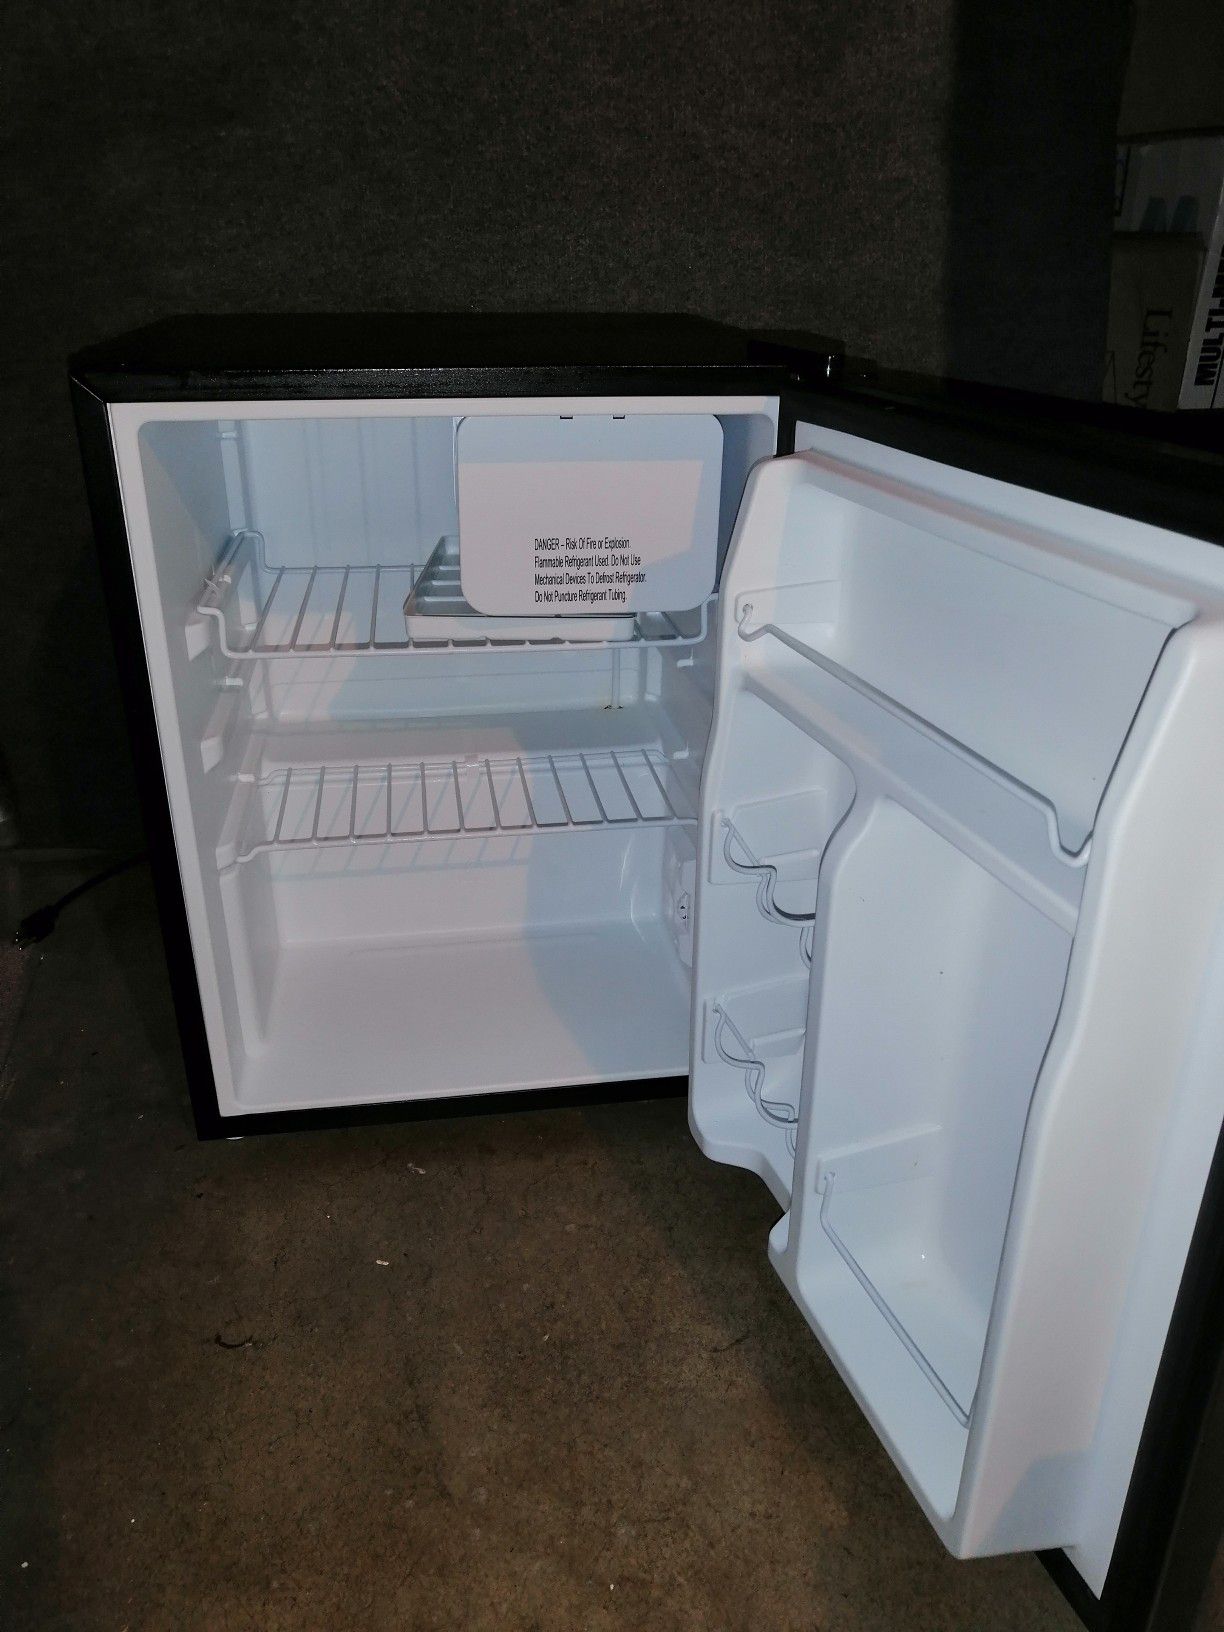 Brand New Whirlpool Mini Refrigerator WH27S1E 2.7 cu.ft 24.5" H x 19" L x 19" With Freezer Compartment